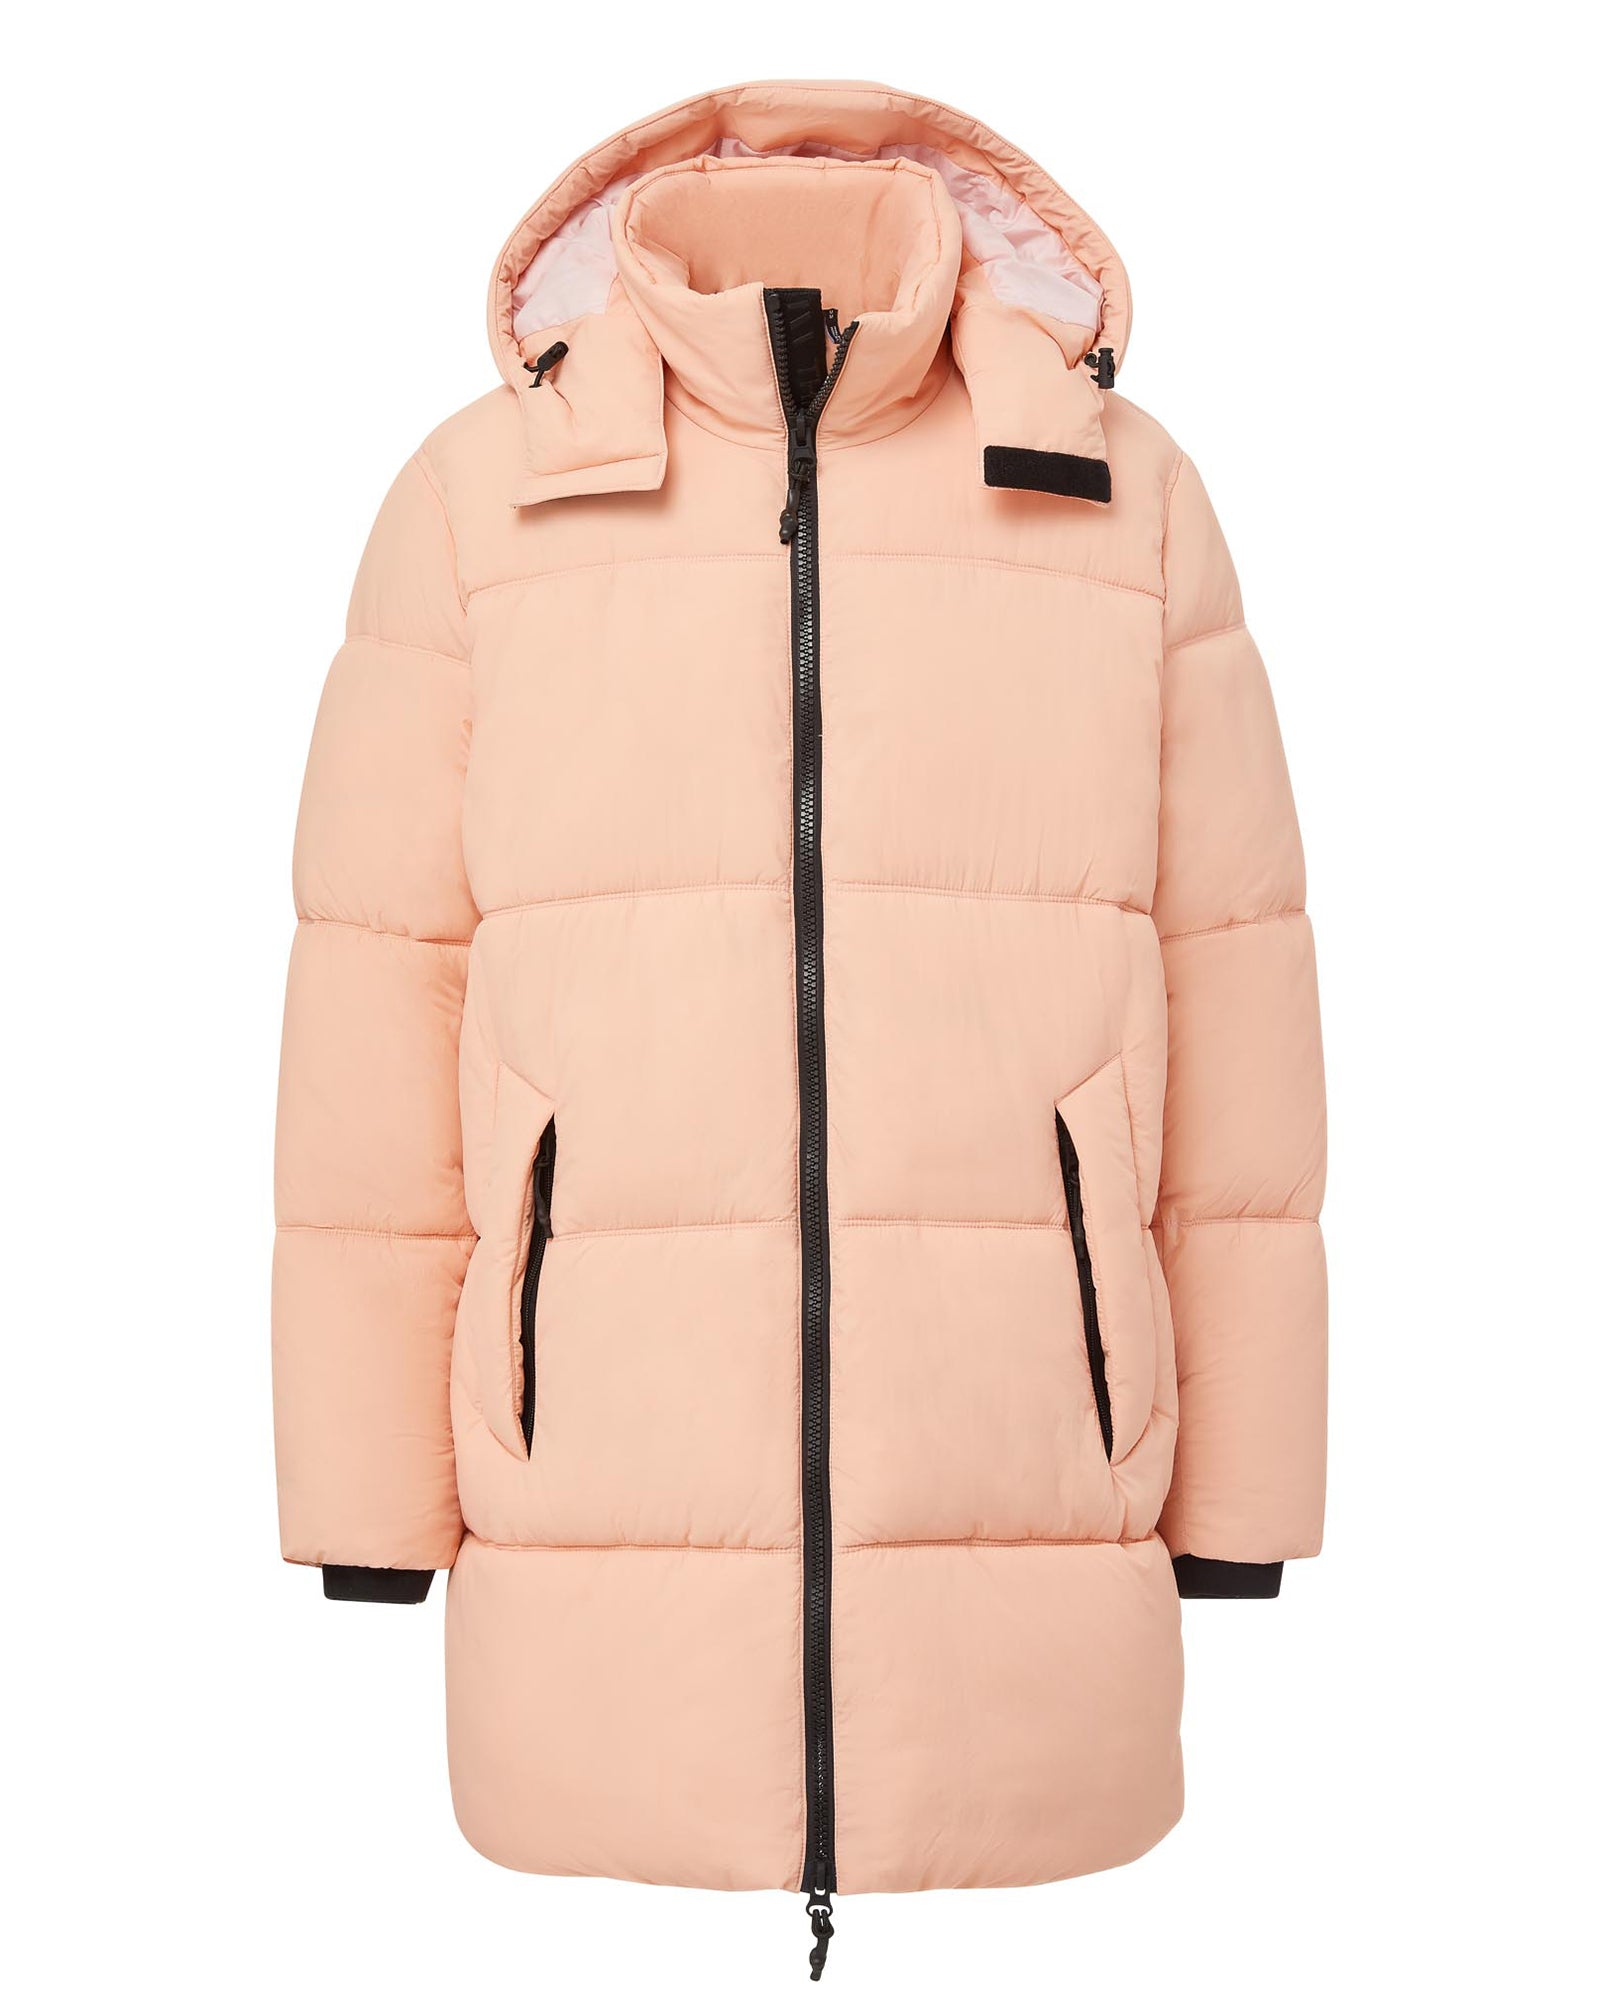 Long Hooded Puffer - Coral Pink